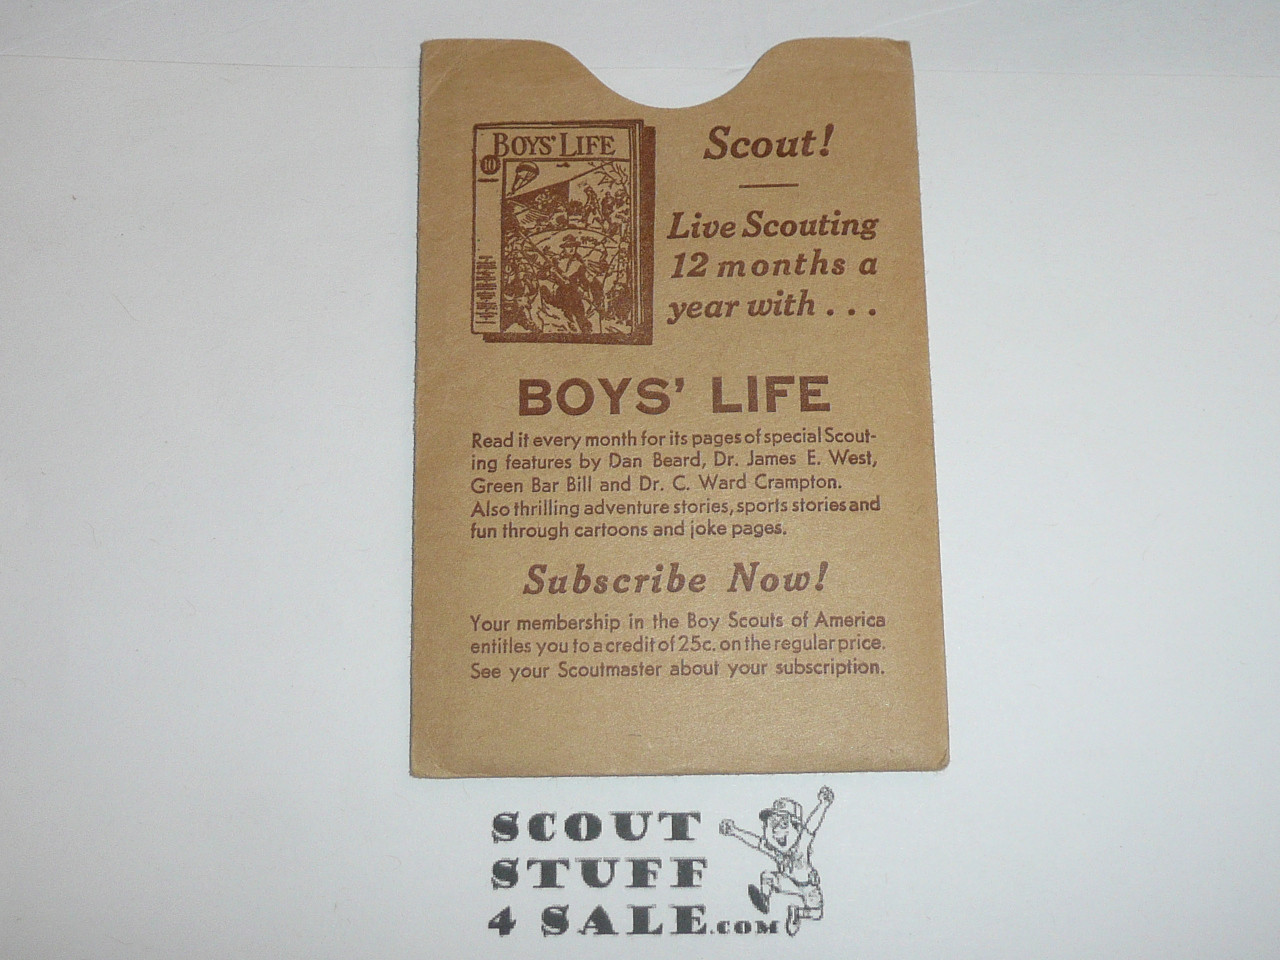 1938 Boy Scout Membership Card, 3-fold, with the Envelope, 7 signatures, expires May 1938, BSMC161